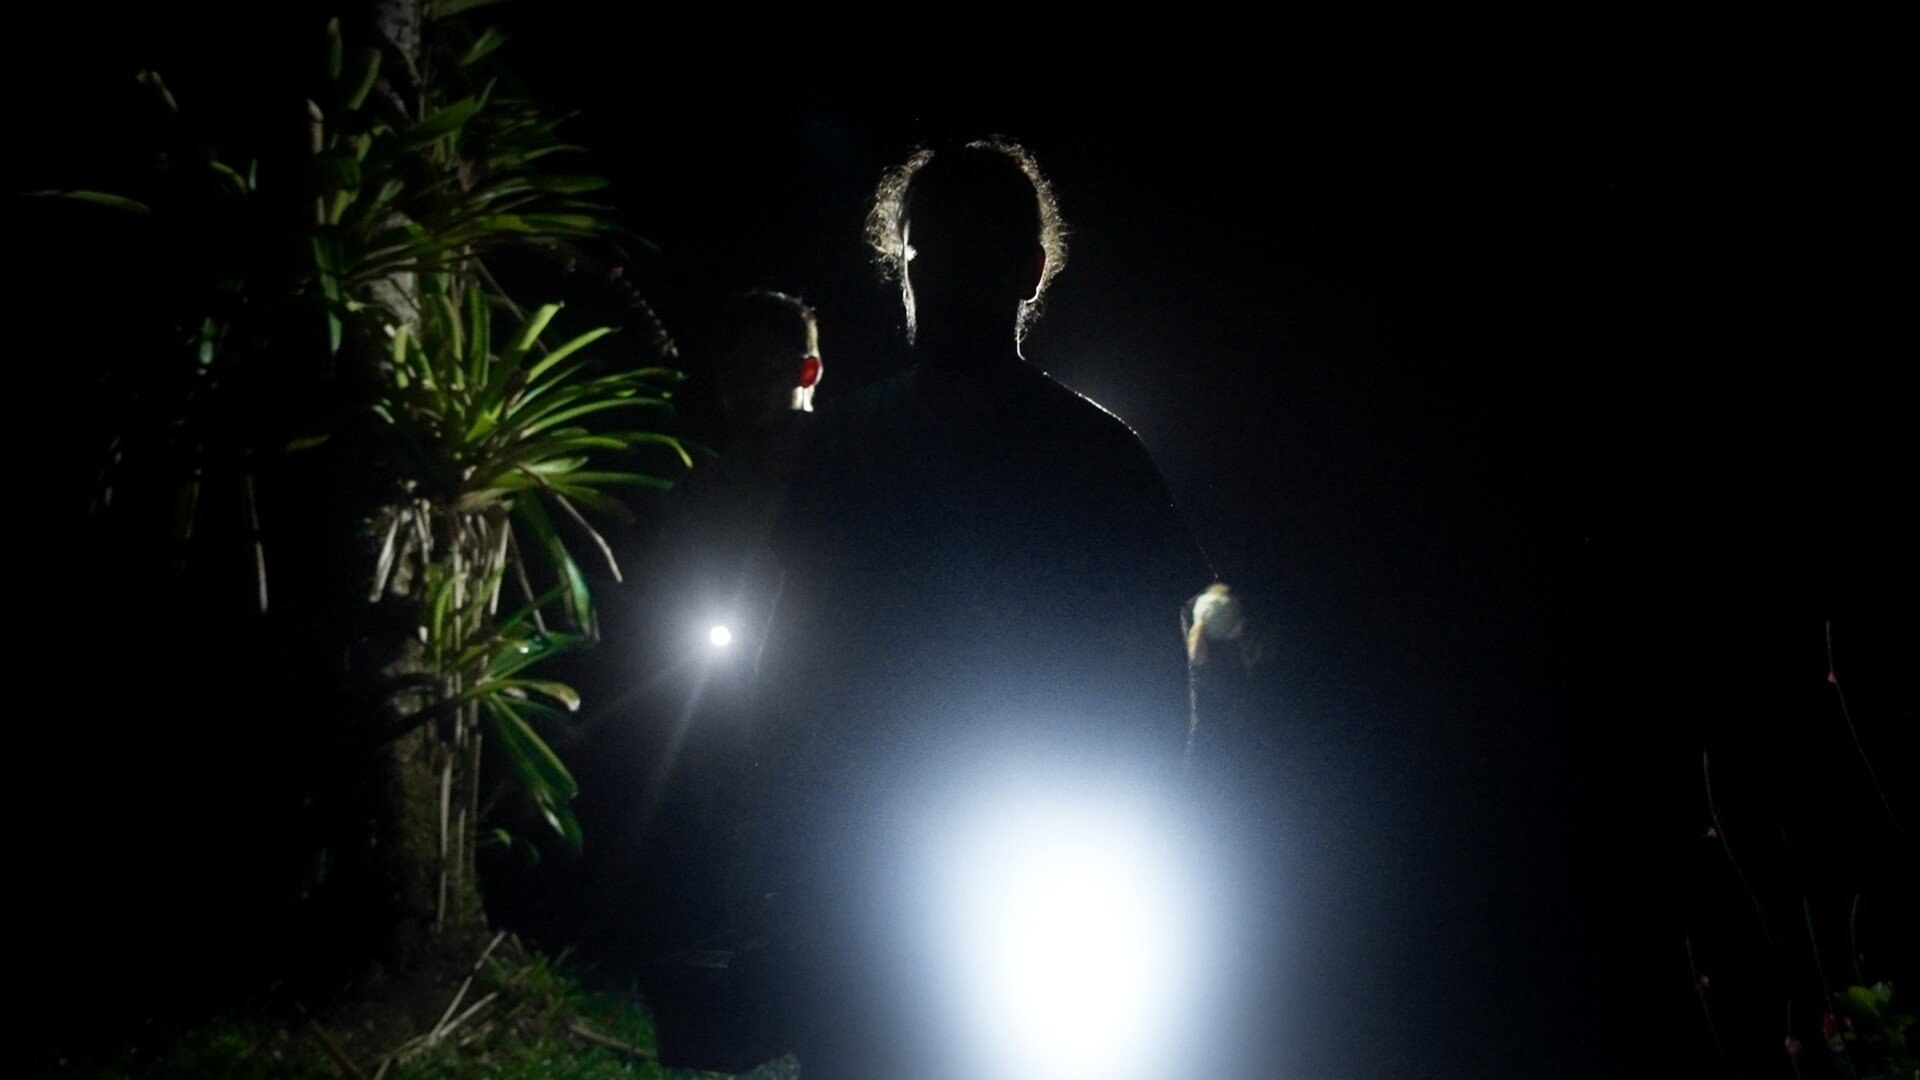 Two people stand in dark with light